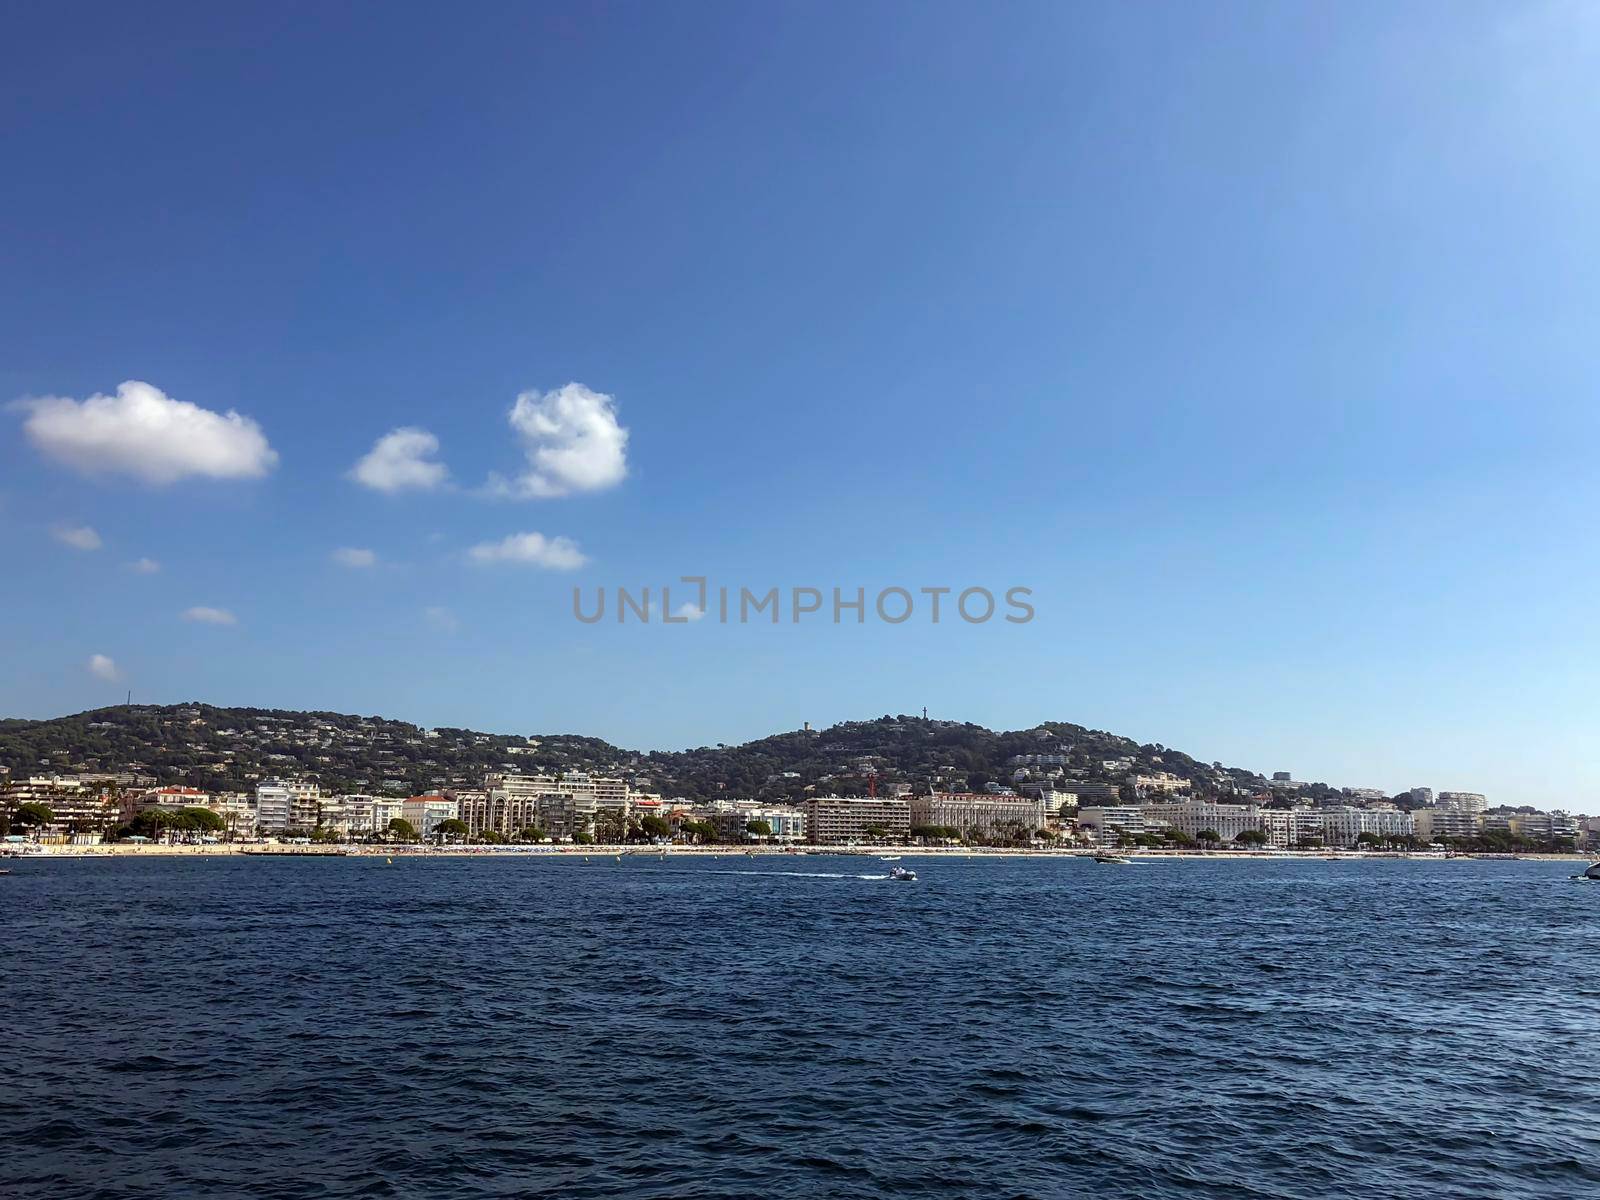 Island Sainte-Marguerite - stock photo. High quality photo Island Sainte-Marguerite is the largest of the Lerino Islands in front of Cannes in France.